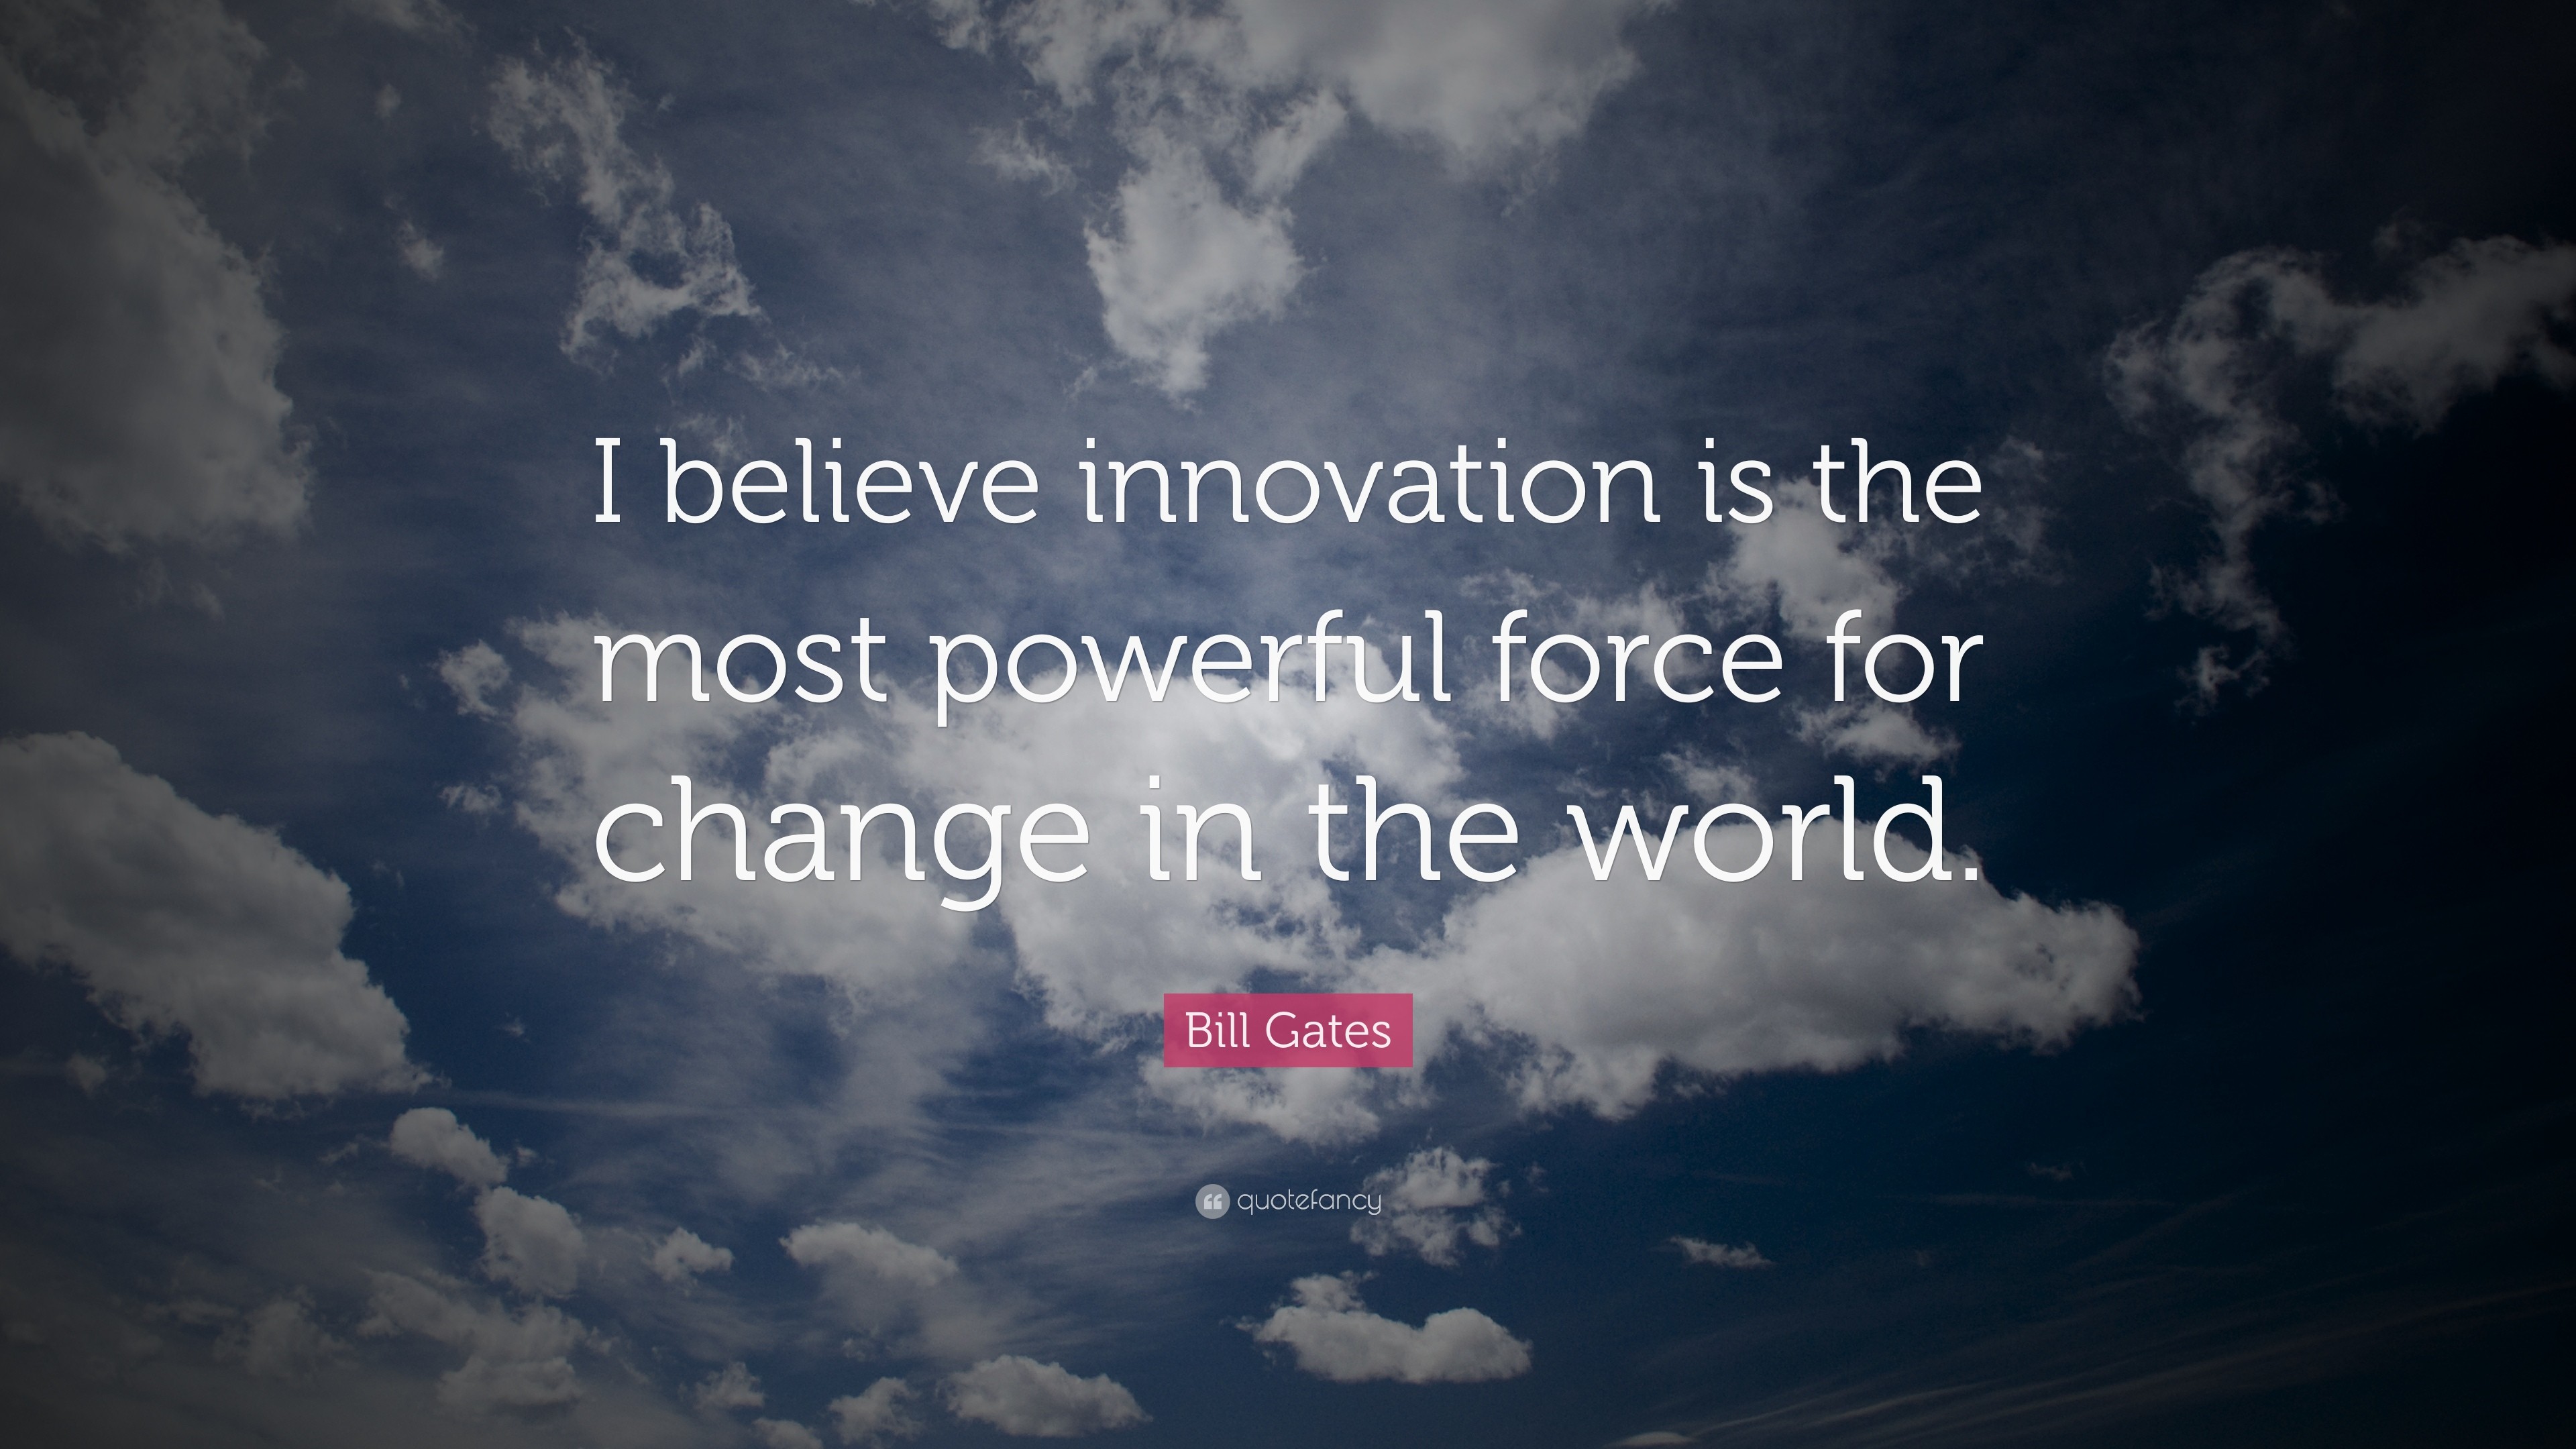 3840x2160 Bill Gates Quote: “I believe innovation is the most powerful force for  change in